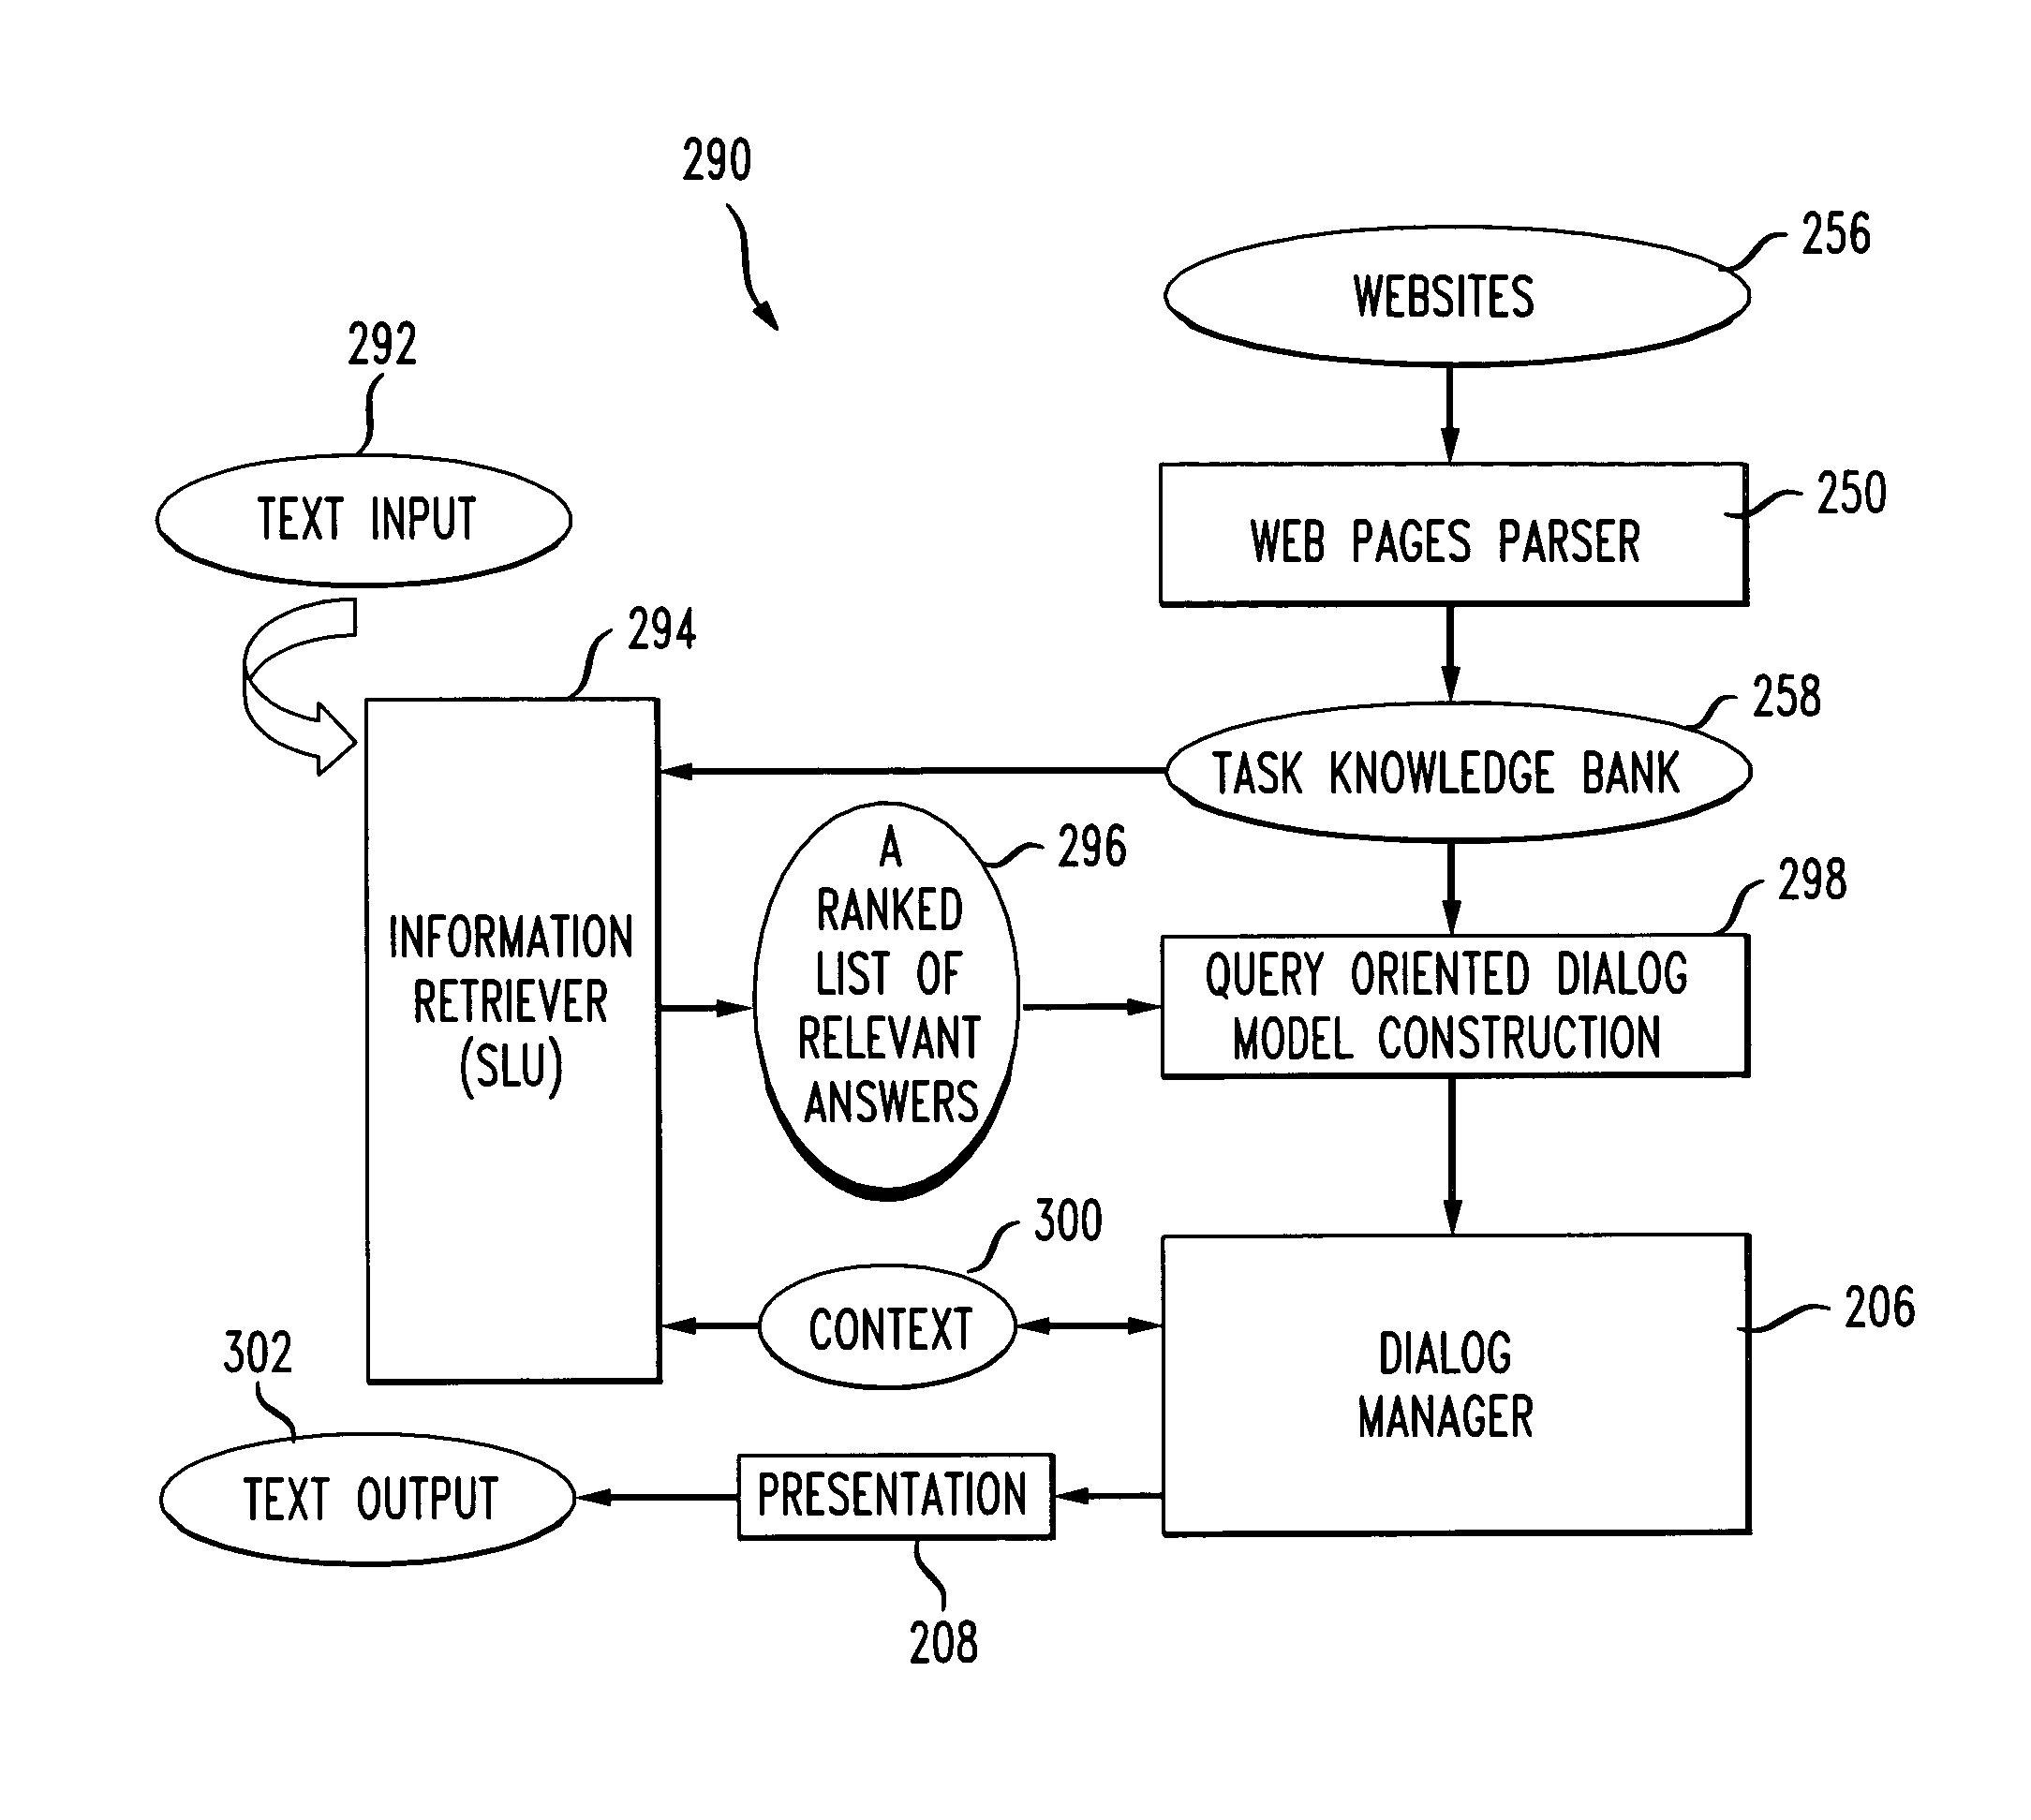 System and method of automating a spoken dialogue service